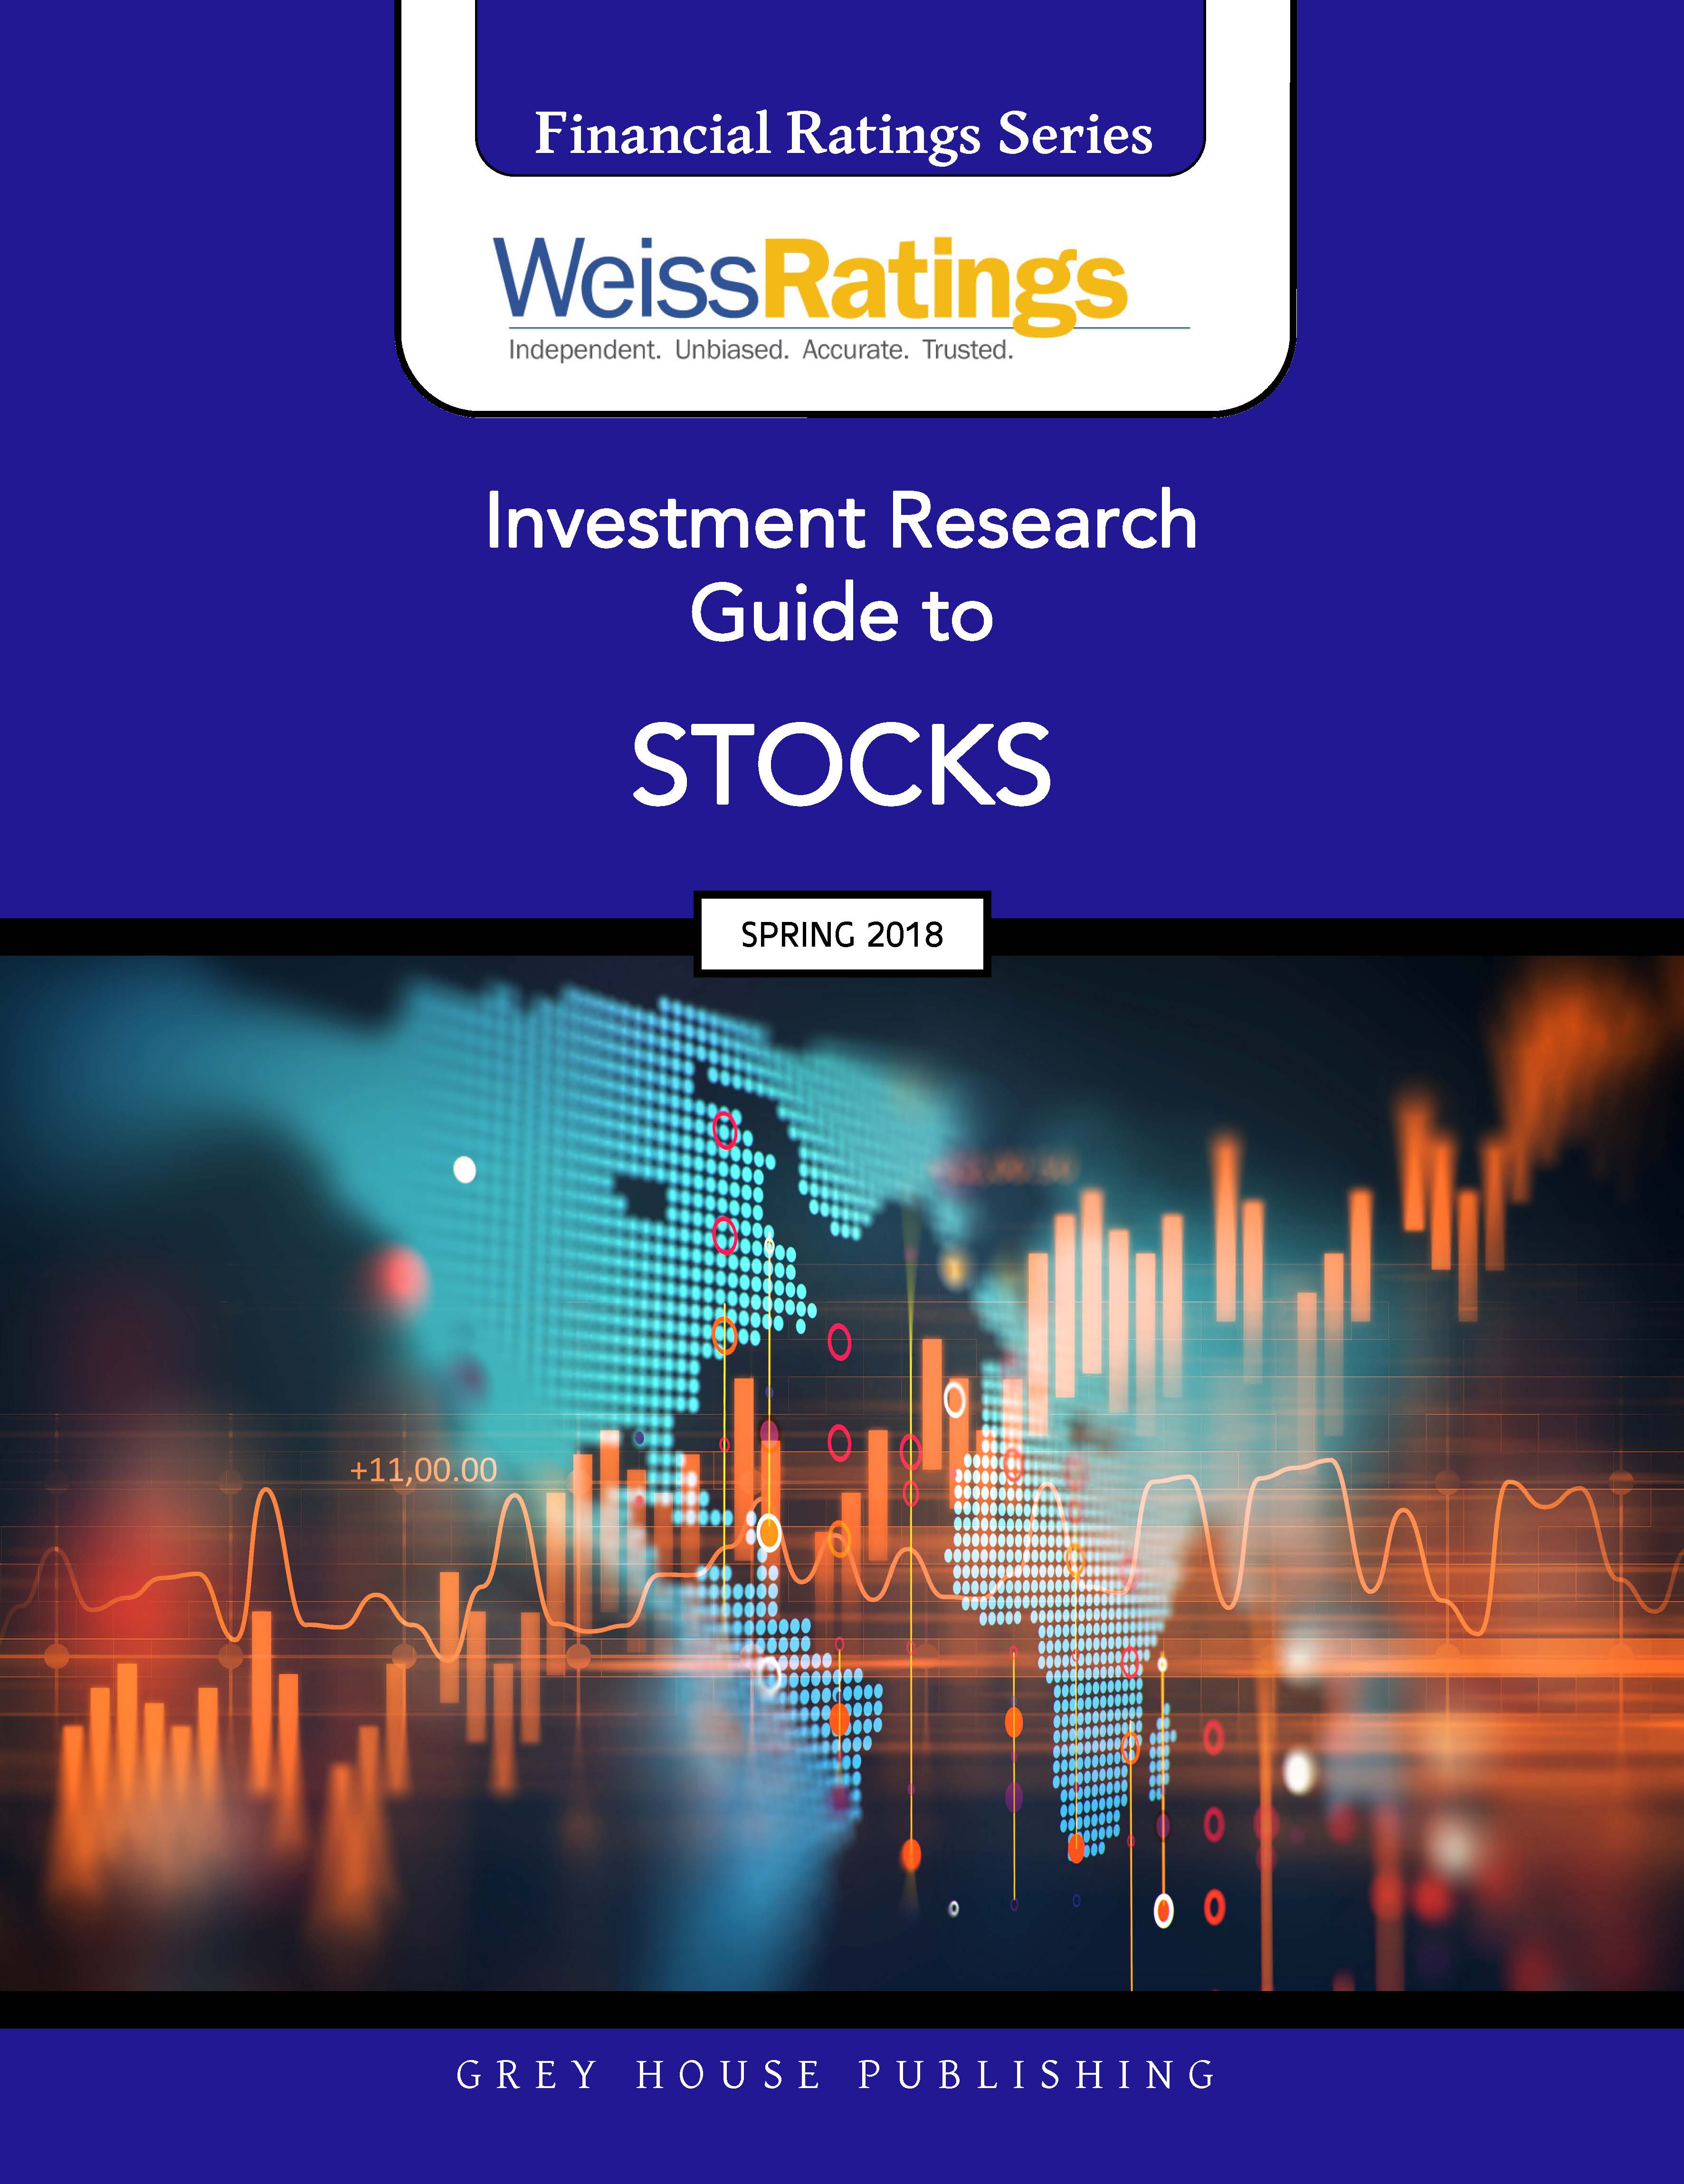 Weiss Ratings Investment Research Guide to Stocks